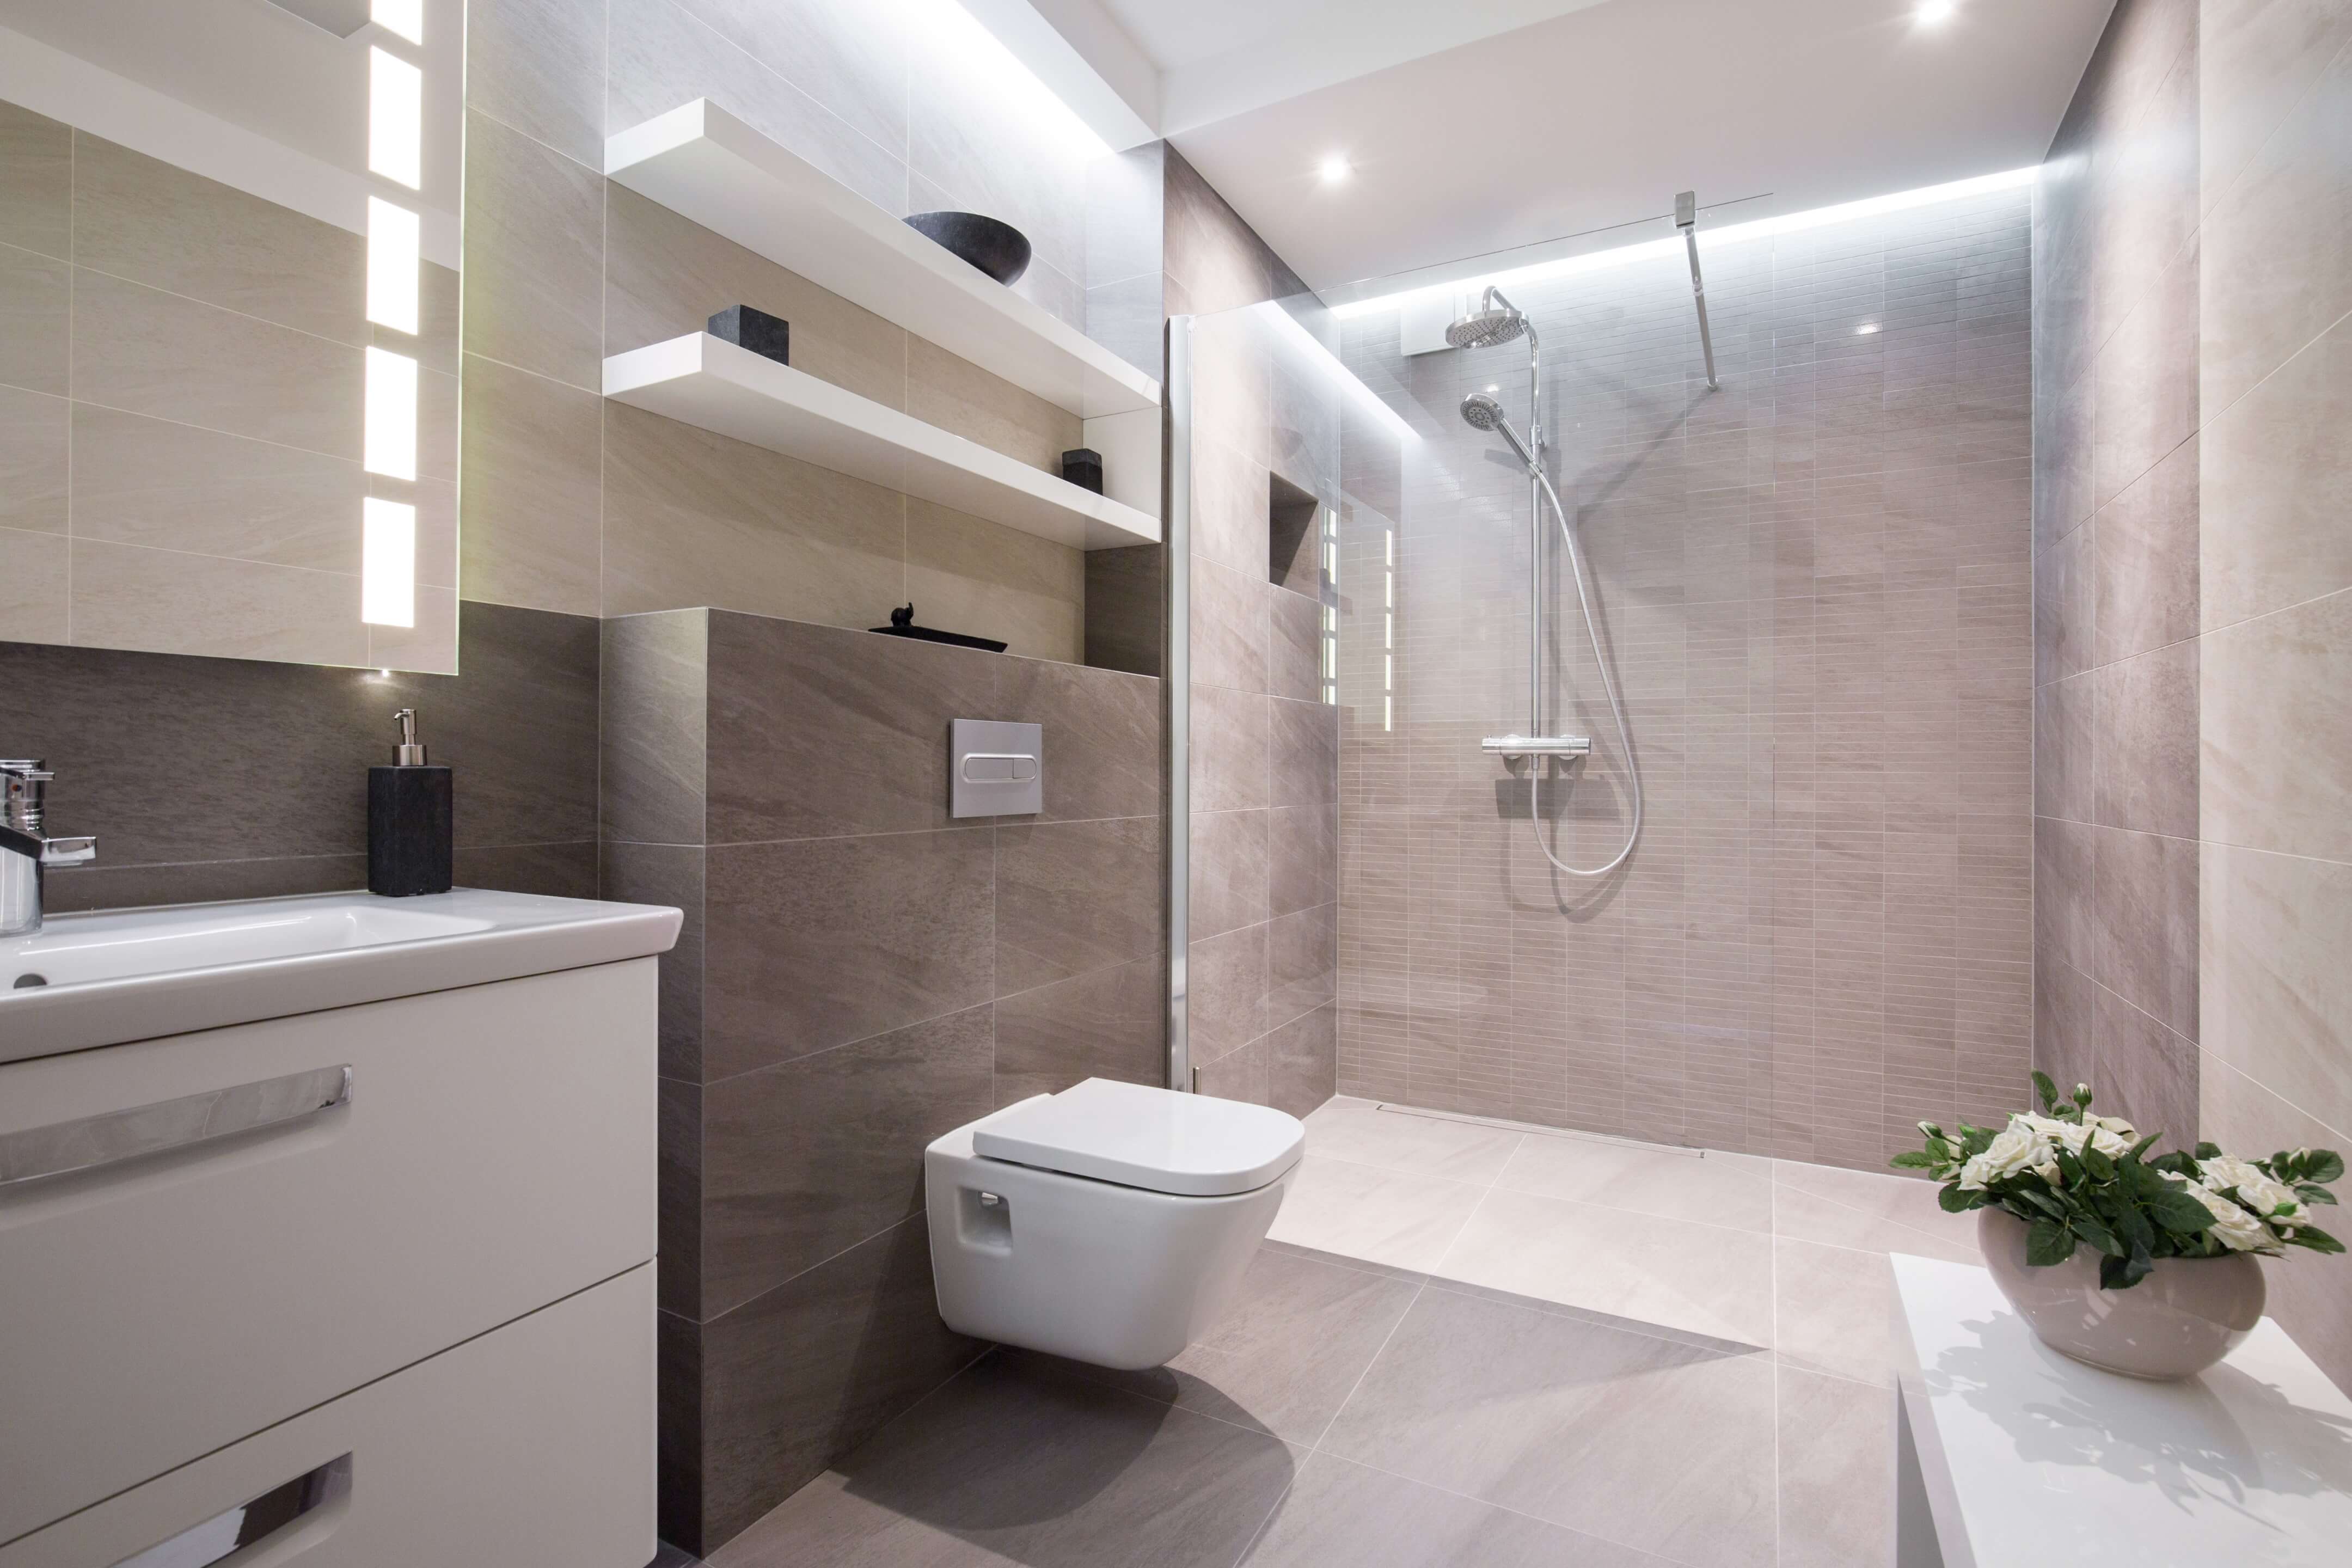 local bathroom fitters rayleigh